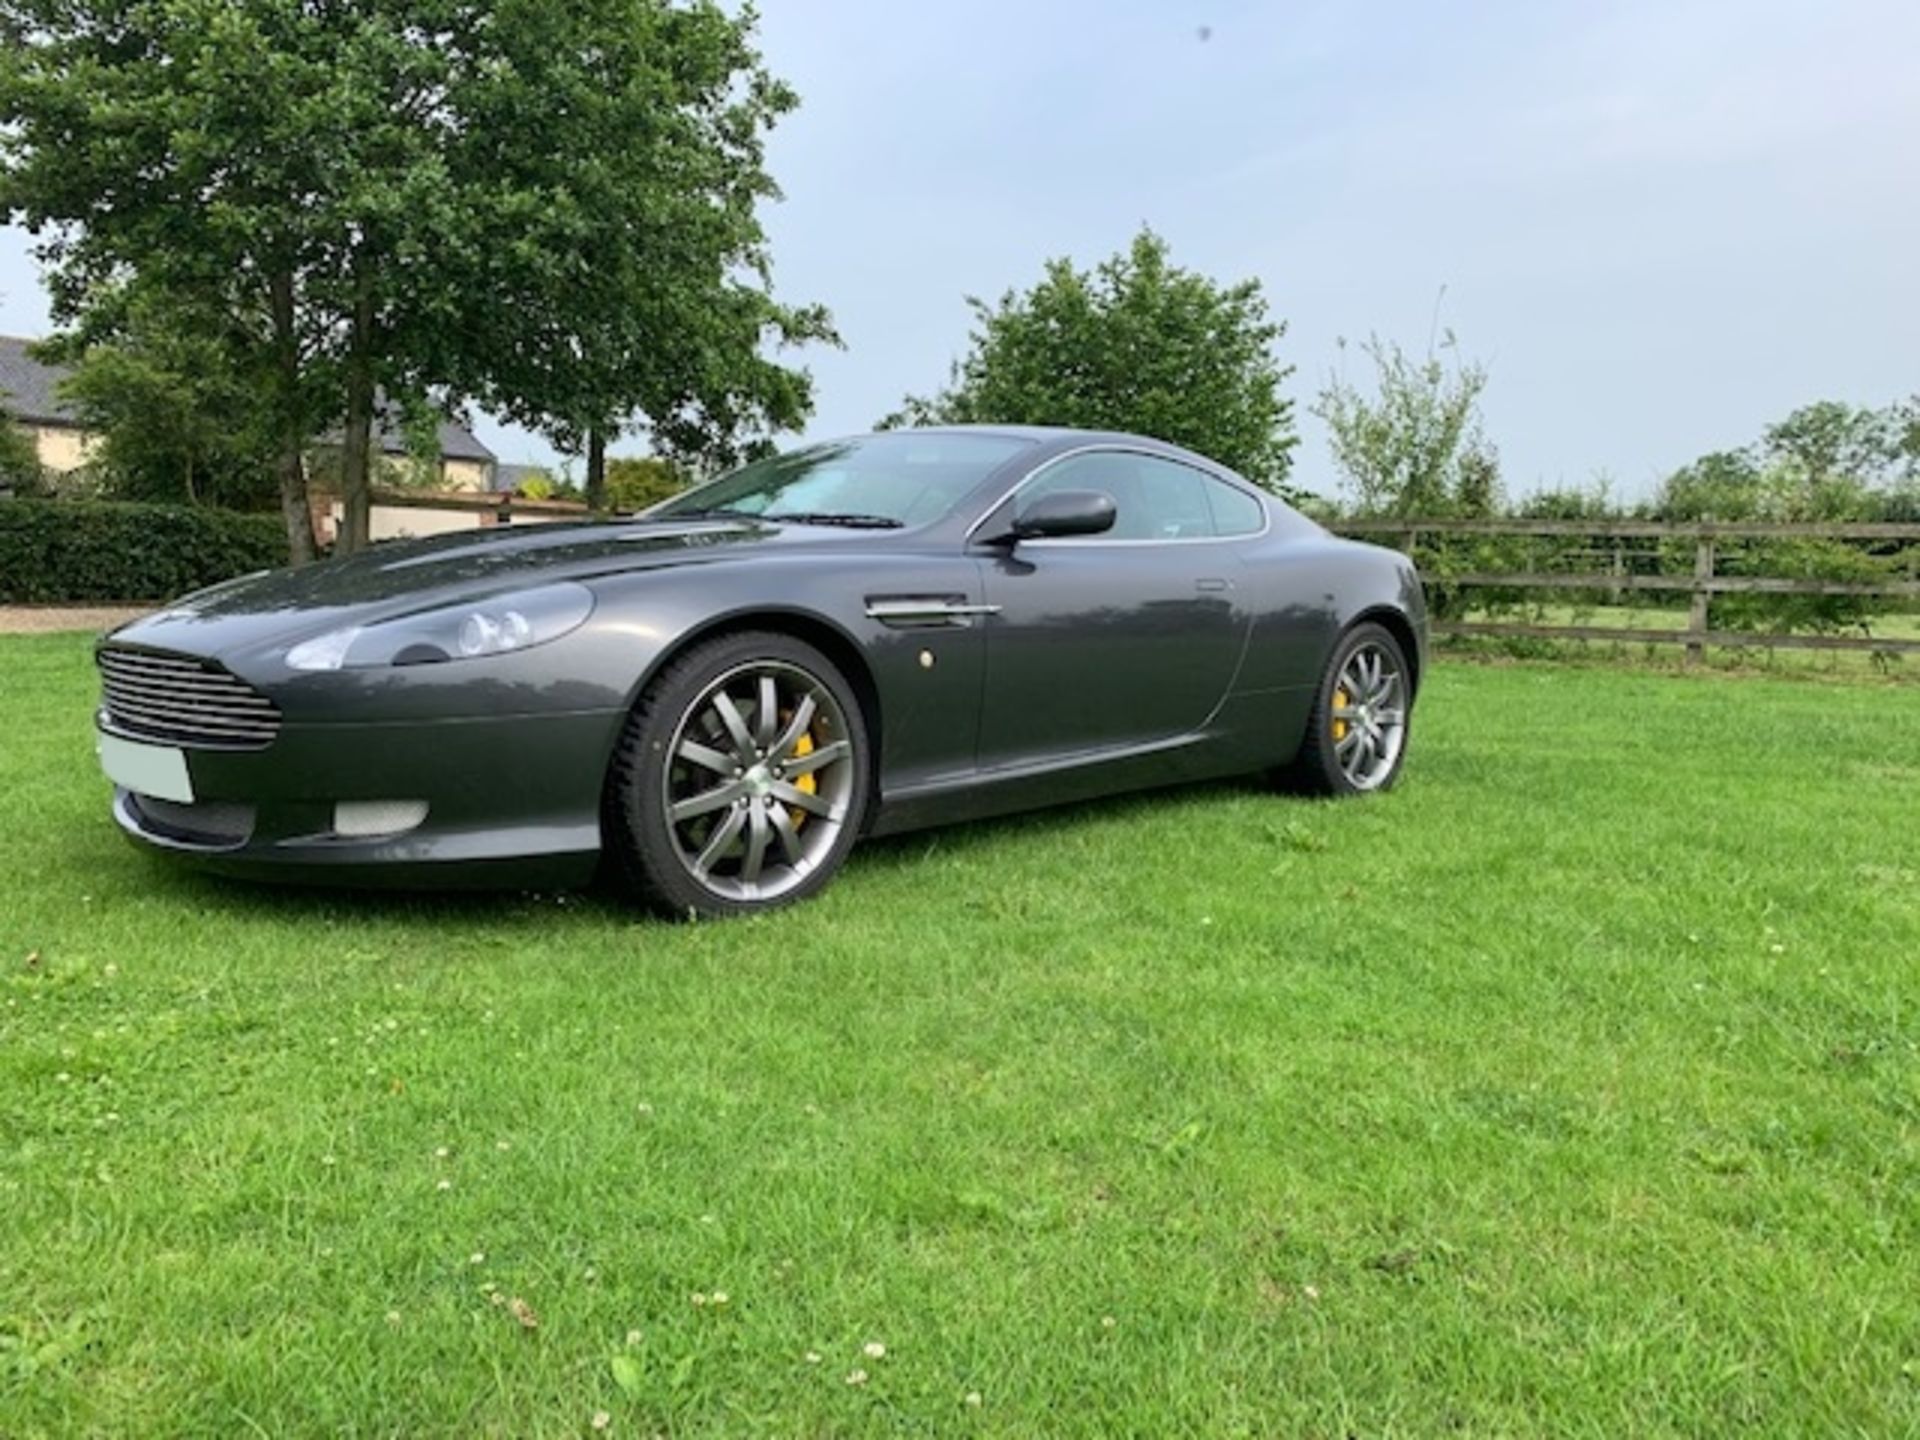 ASTON MARTIN DB9 COUPE V12 2DR TOUCHTRONIC AUTO (5935 cc) - Image 5 of 13